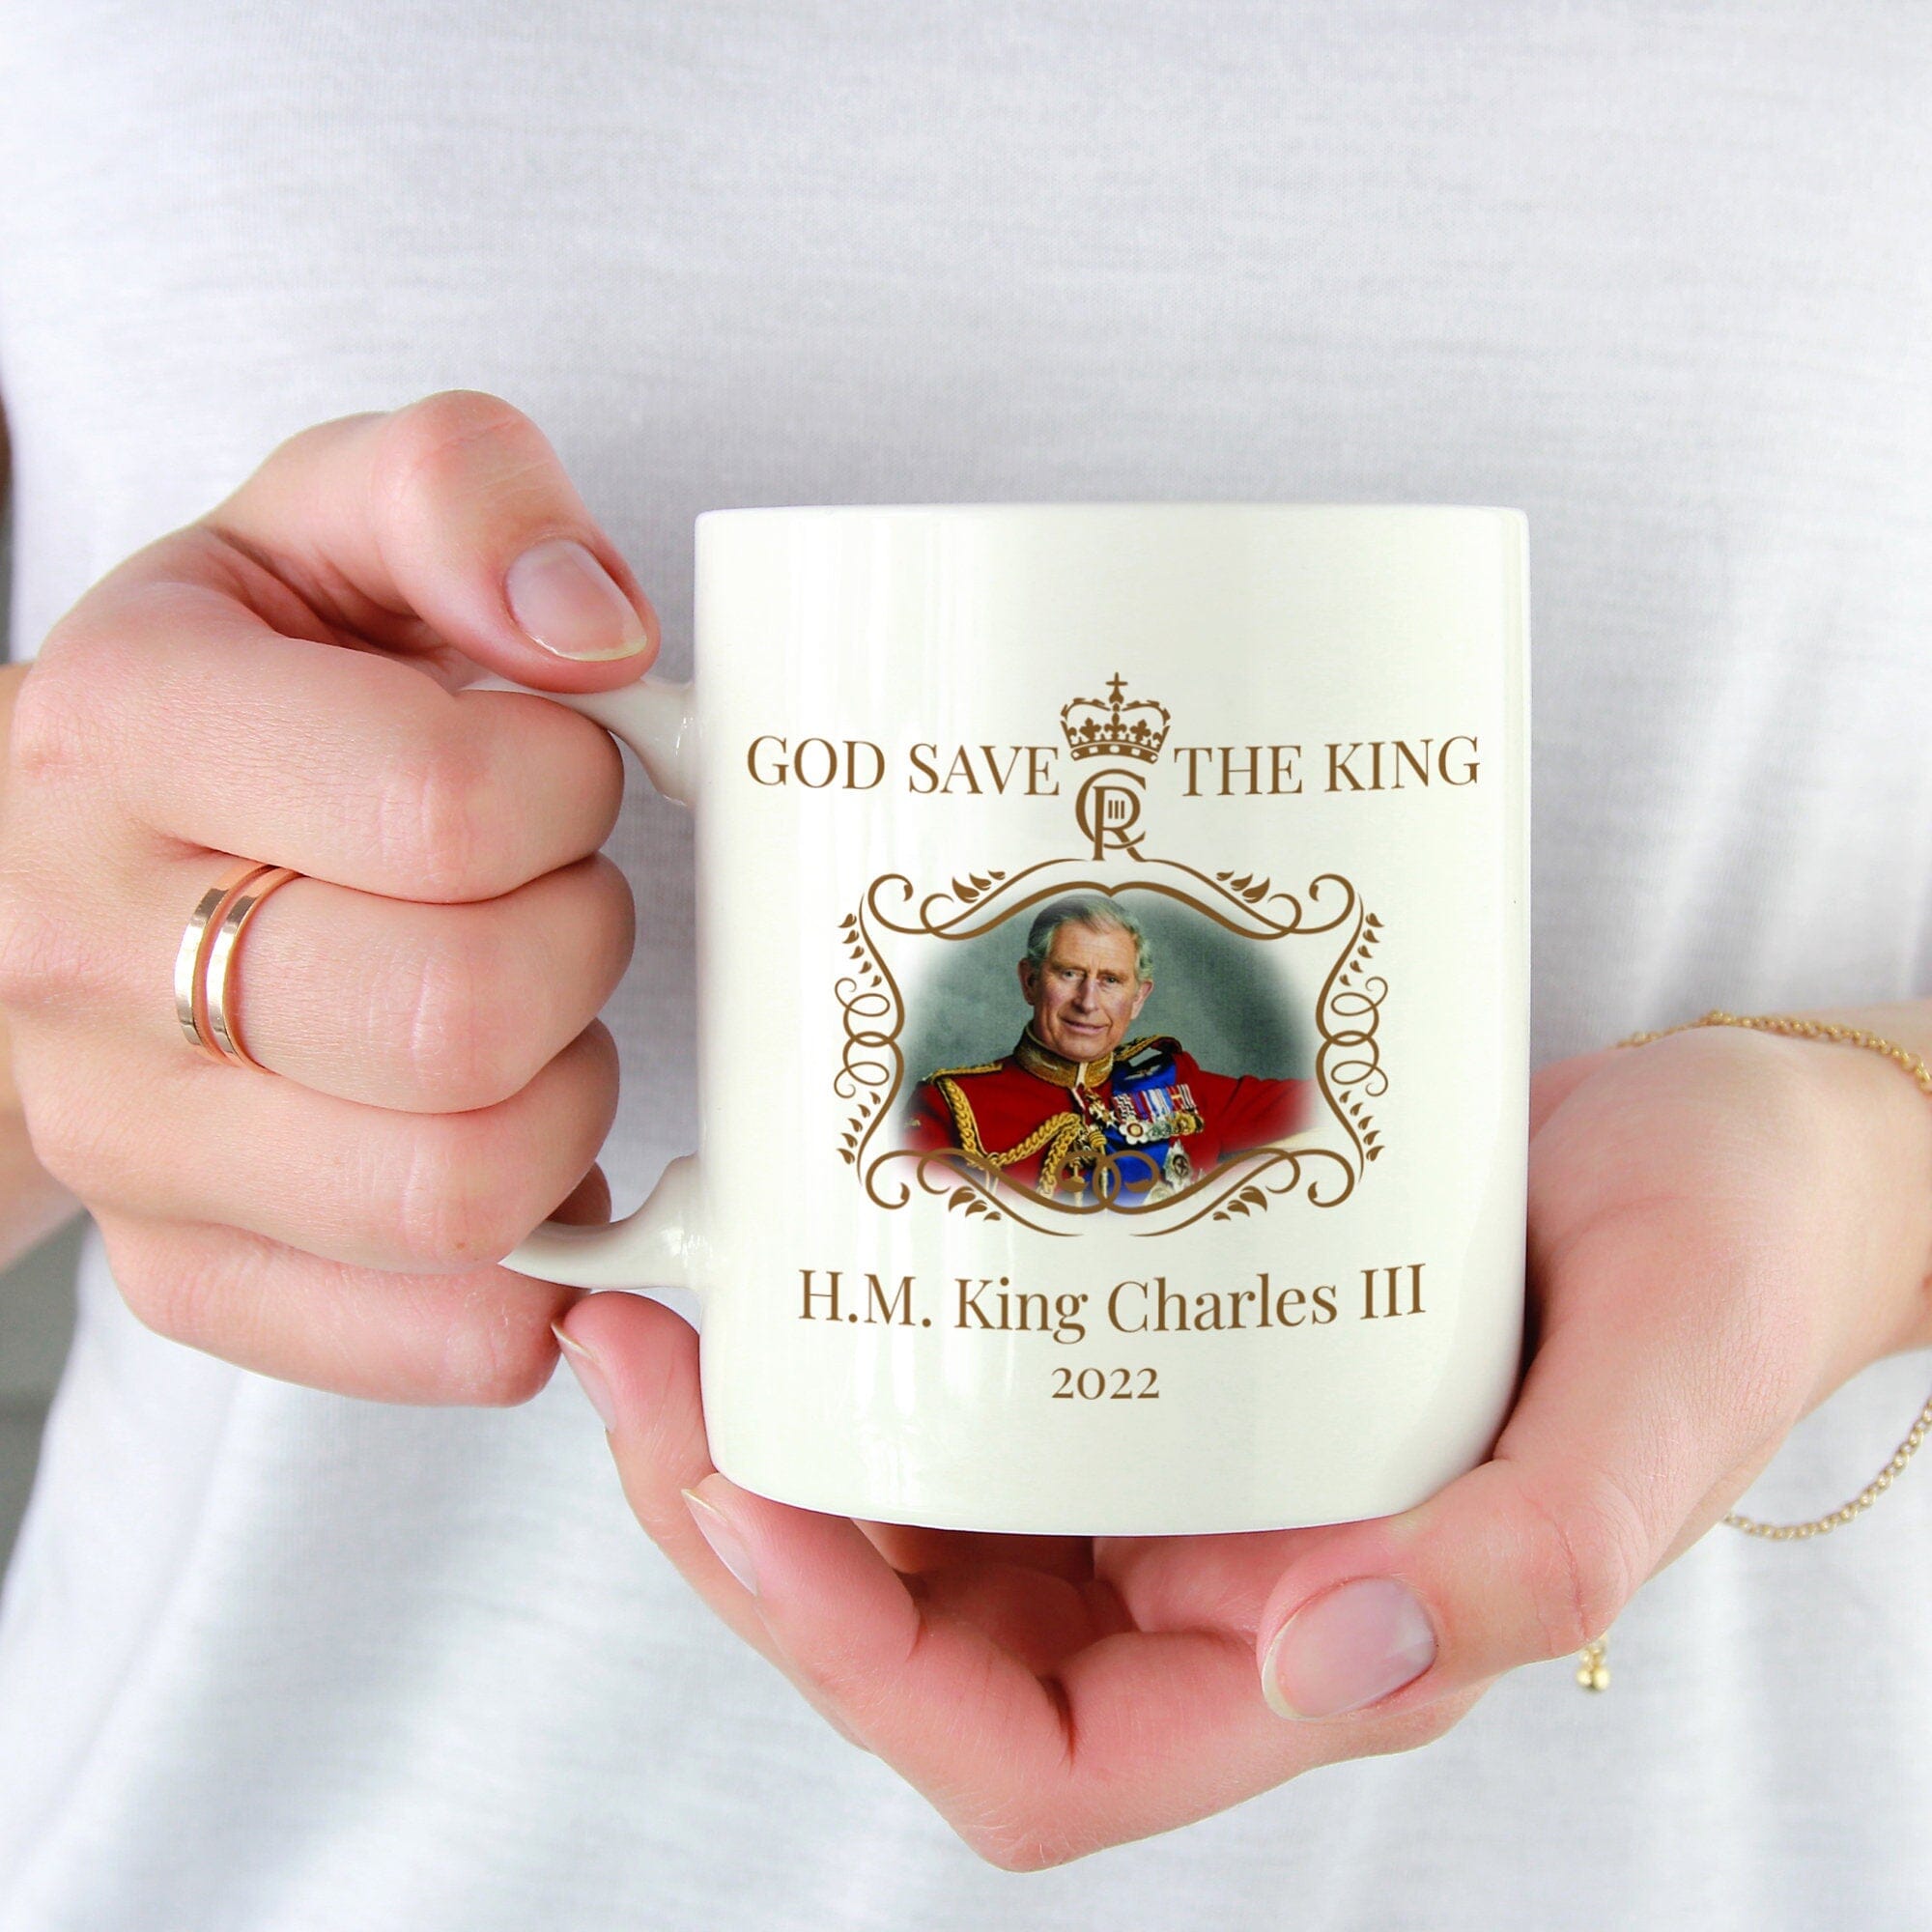 Hm King Charles Iii Mug, God Save The King, Commemorative Cup 2022, The King Celebration Gift For Her Him